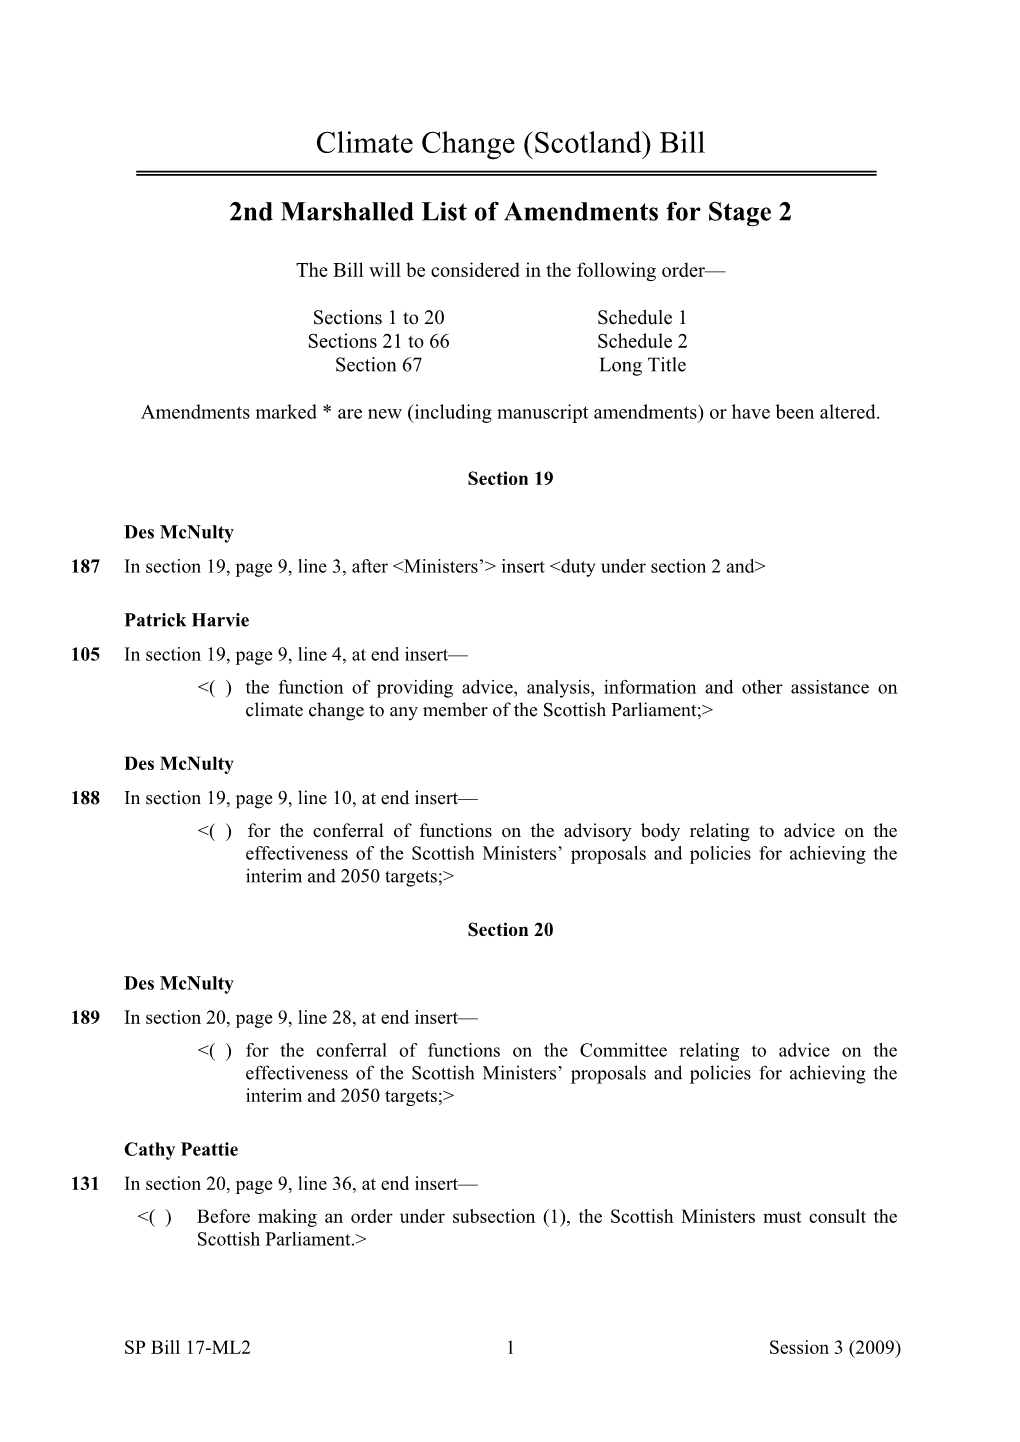 2Nd Marshalled List of Amendments for Stage 2